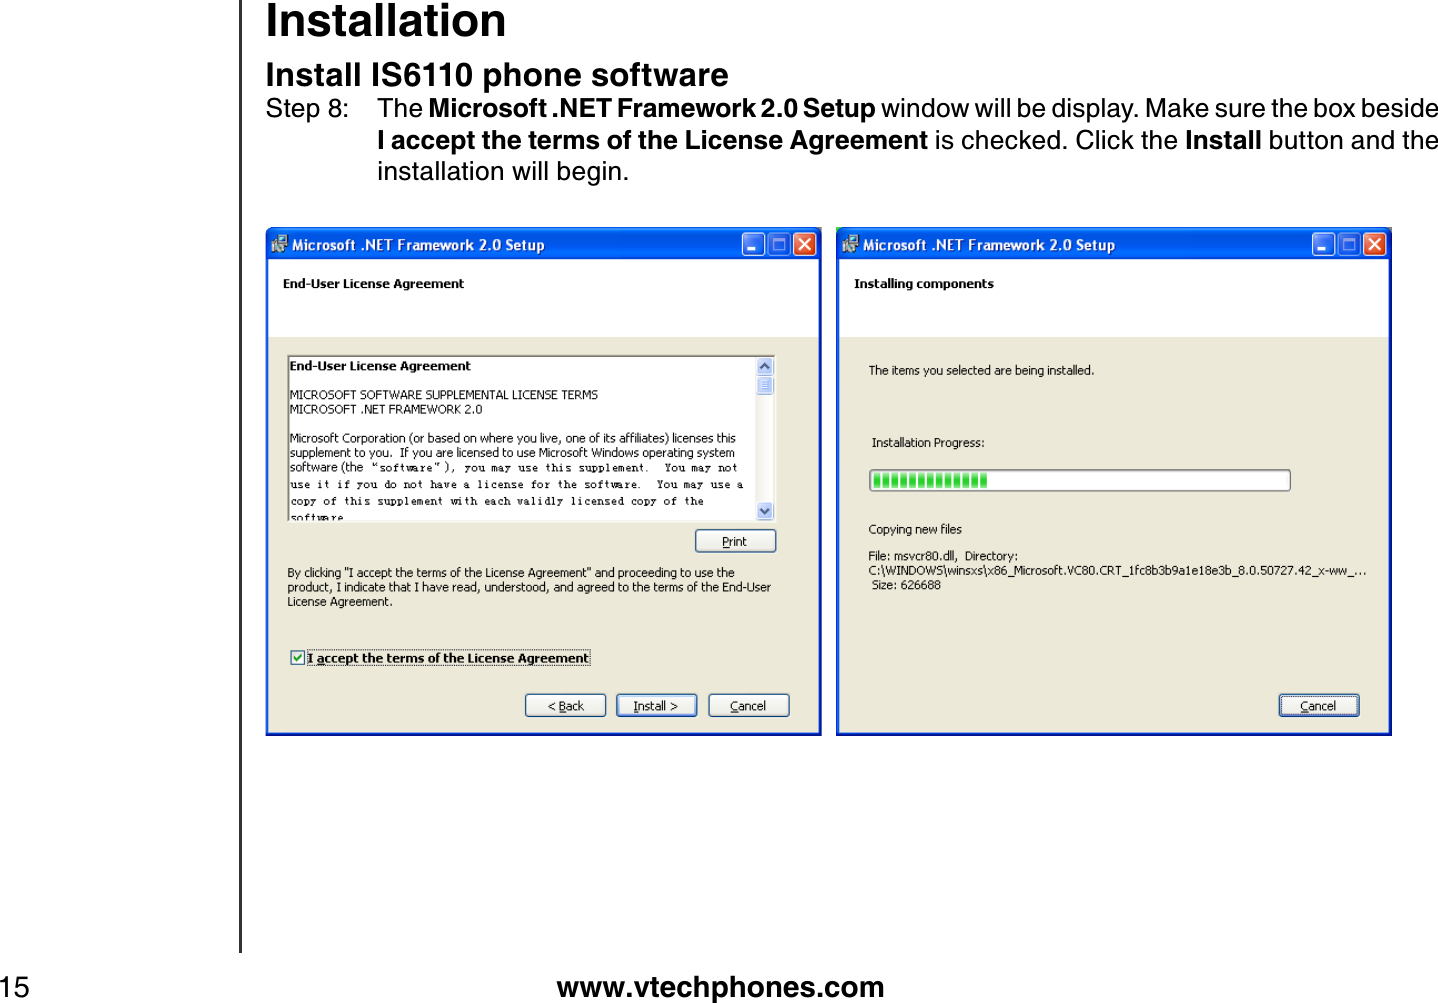 www.vtechphones.com15InstallationInstall IS6110 phone softwareStep 8: The Microsoft .NET Framework 2.0 Setup window will be display. Make sure the box beside  I accept the terms of the License Agreement is checked. Click the Install button and the installation will begin.